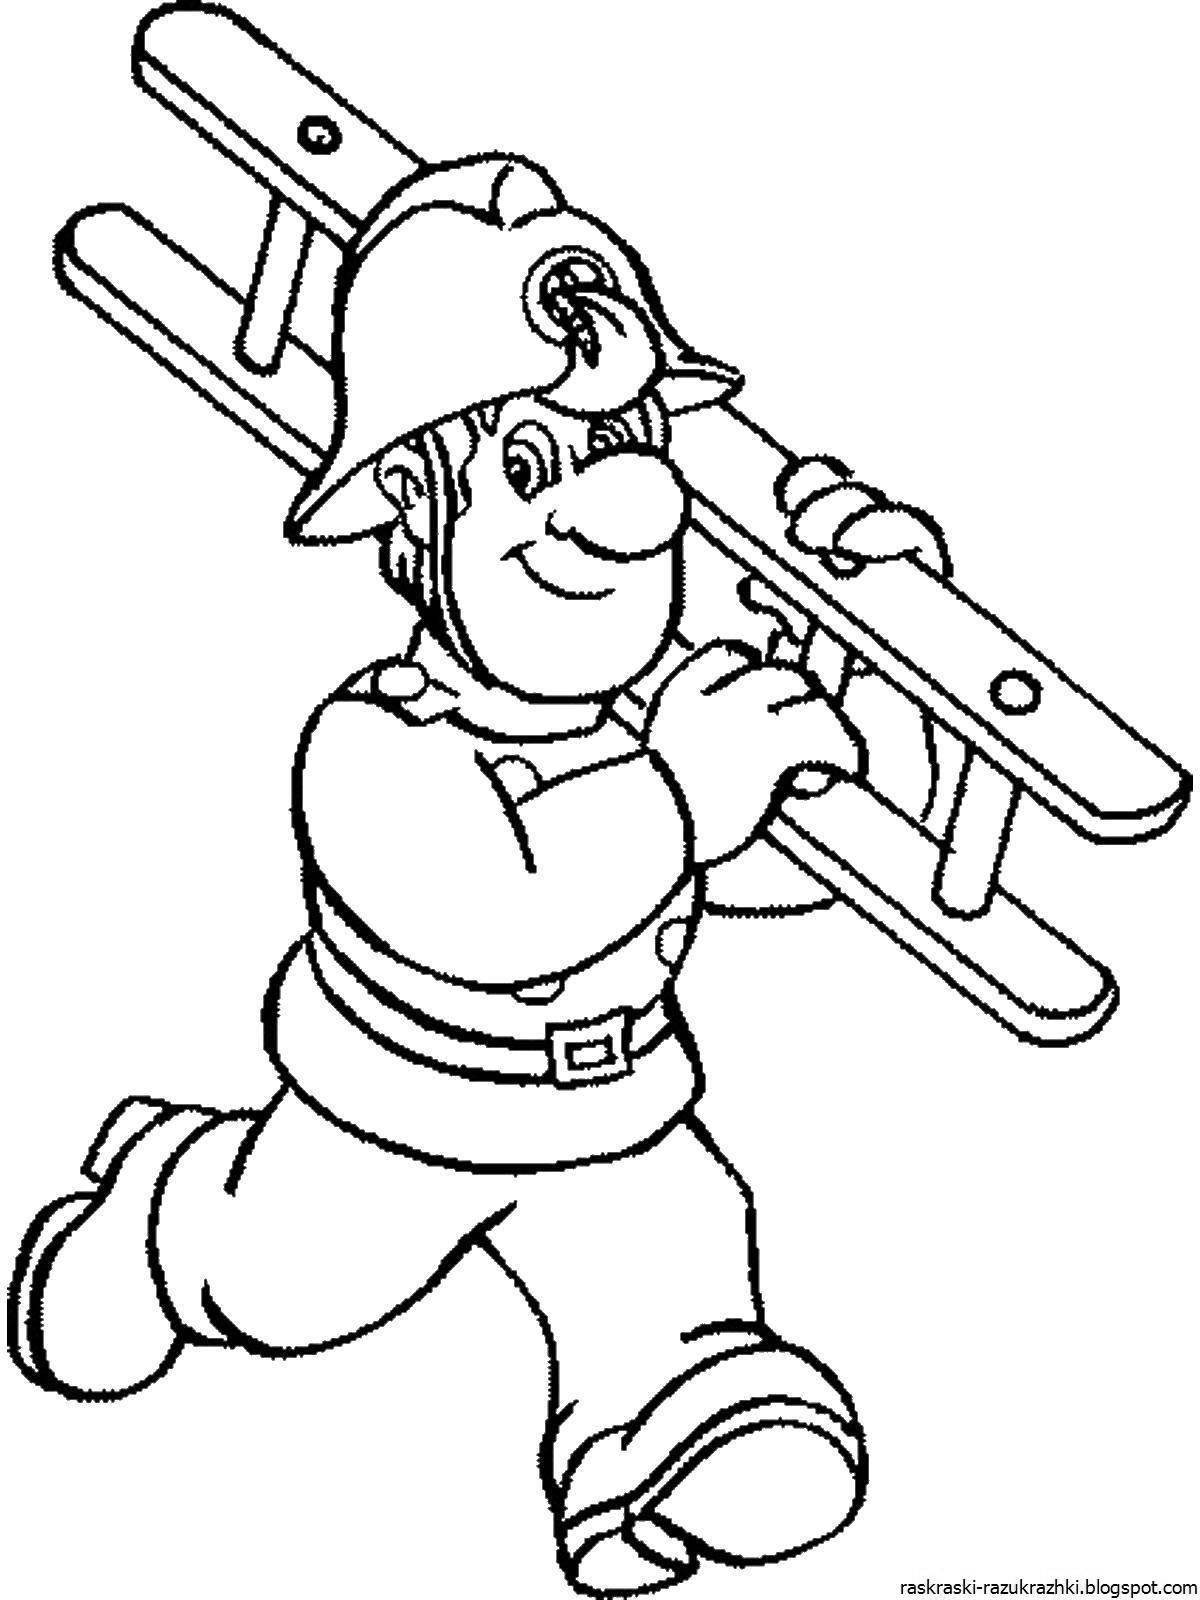 Gorgeous firefighter coloring page